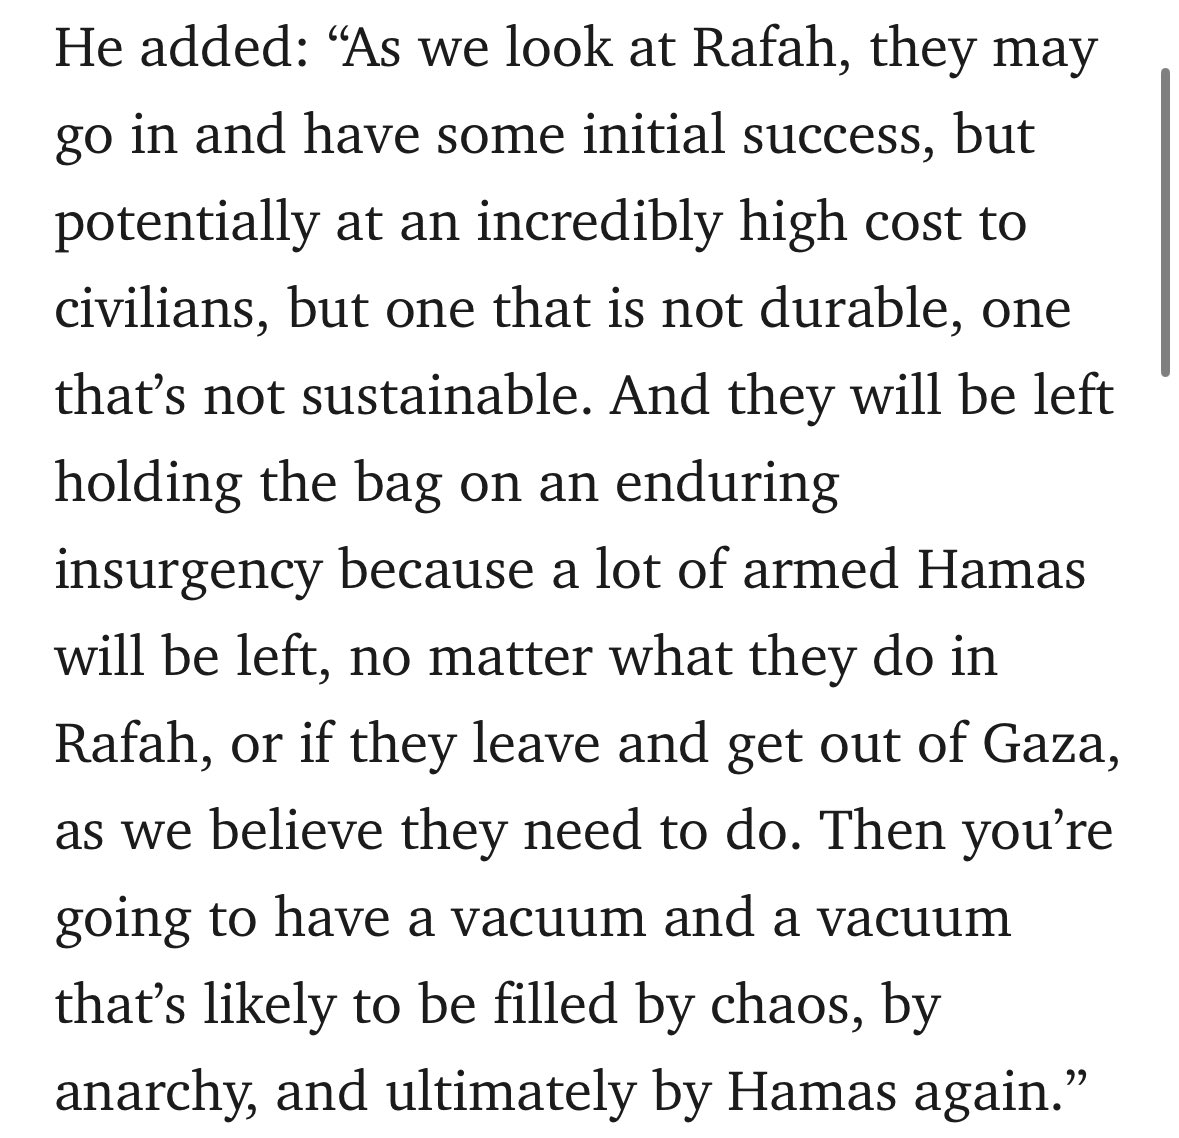 This is legit the dumbest thing I’ve ever seen a government official say. Blinken is arguing to surrender, leave Gaza, and allow Hamas to win (literally) and continue to rule to…avoid an insurgency by Hamas?